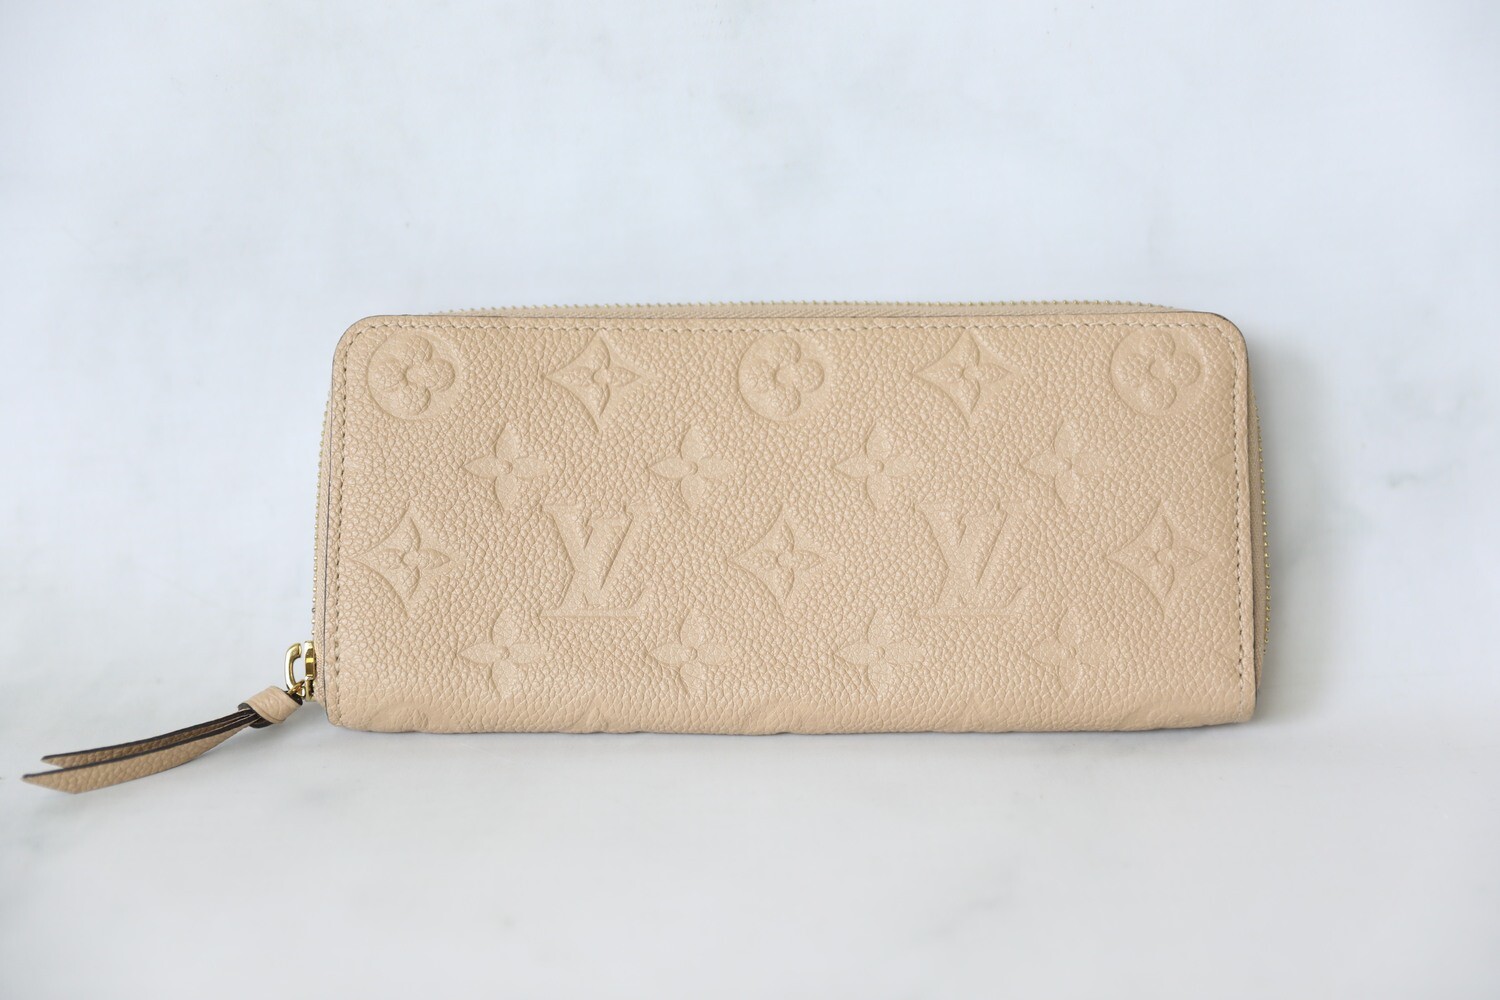 Clemence wallet! Yay or Nay?